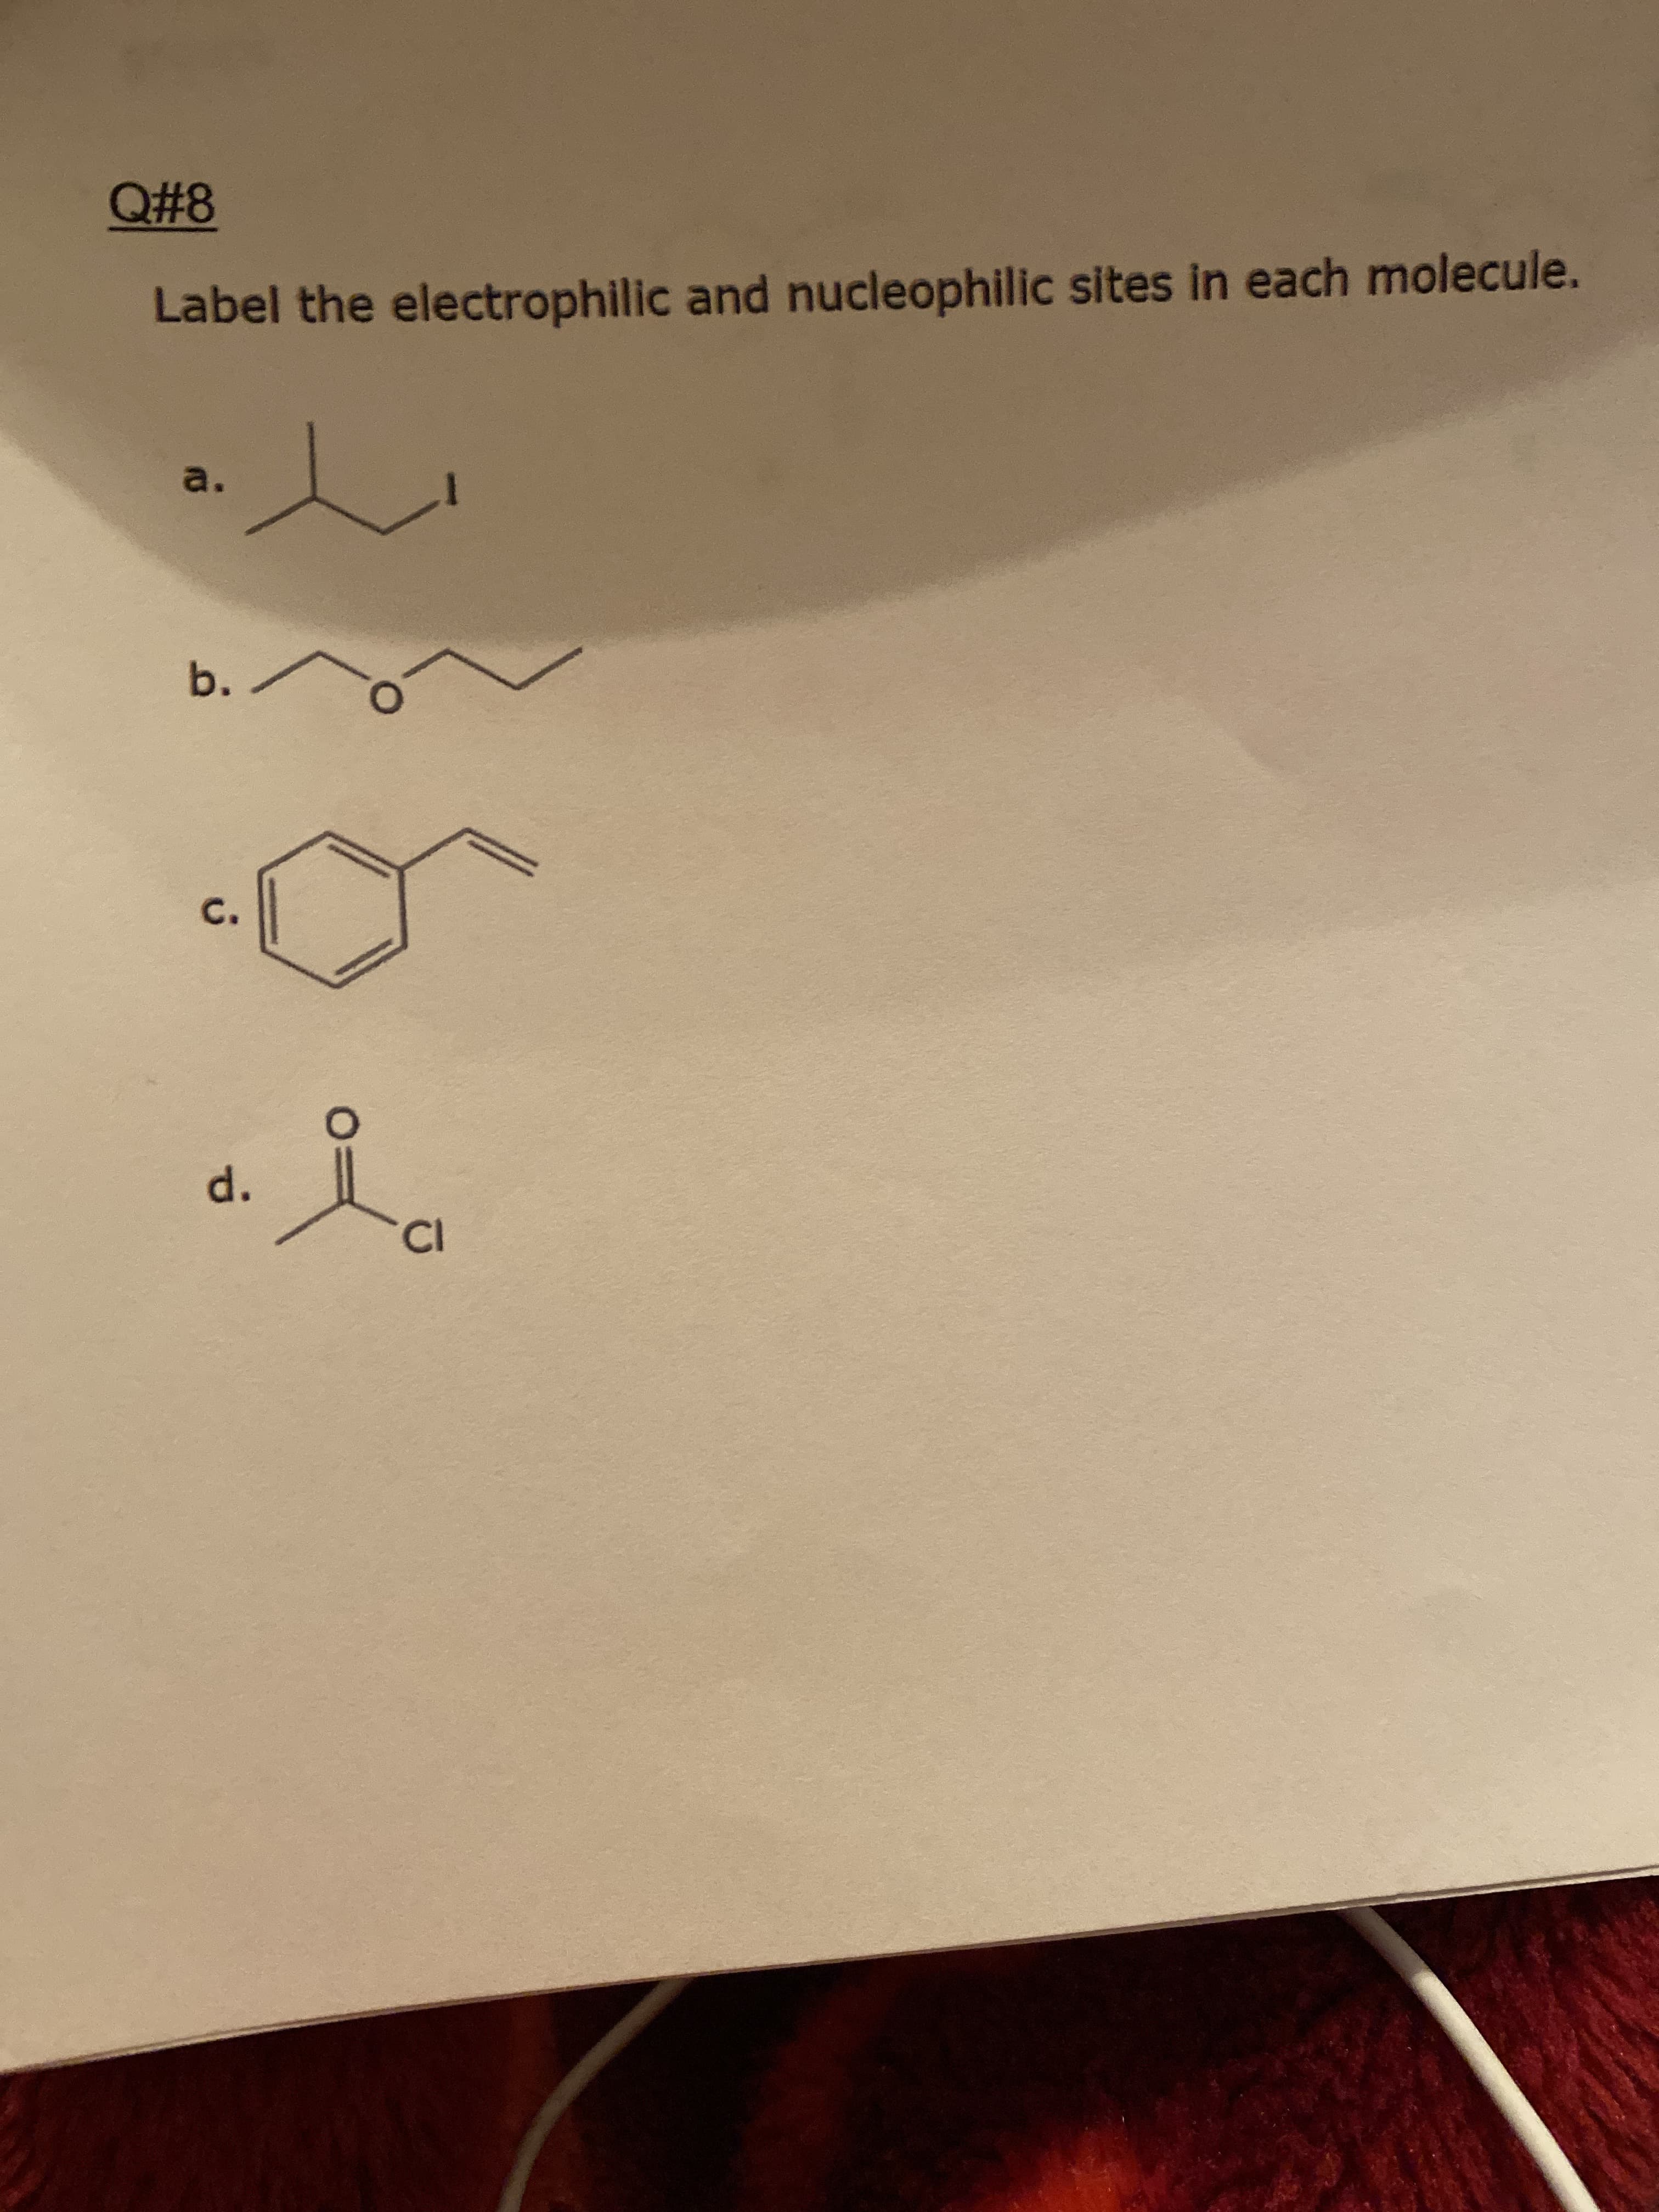 Label the electrophilic and nucleophilic sites in each molecule.
